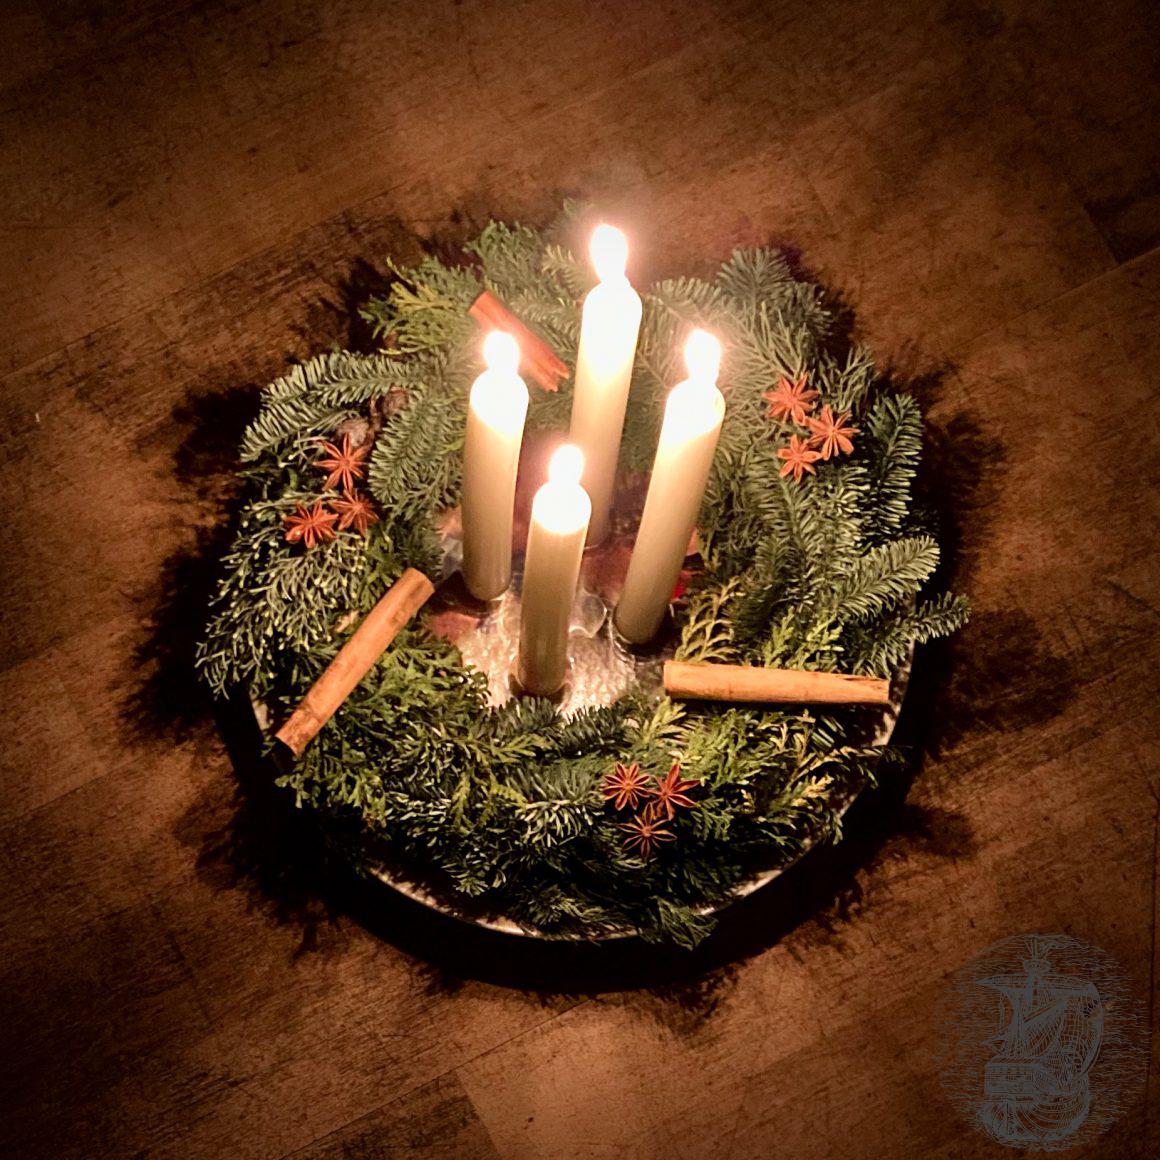 advent wreath with decorations